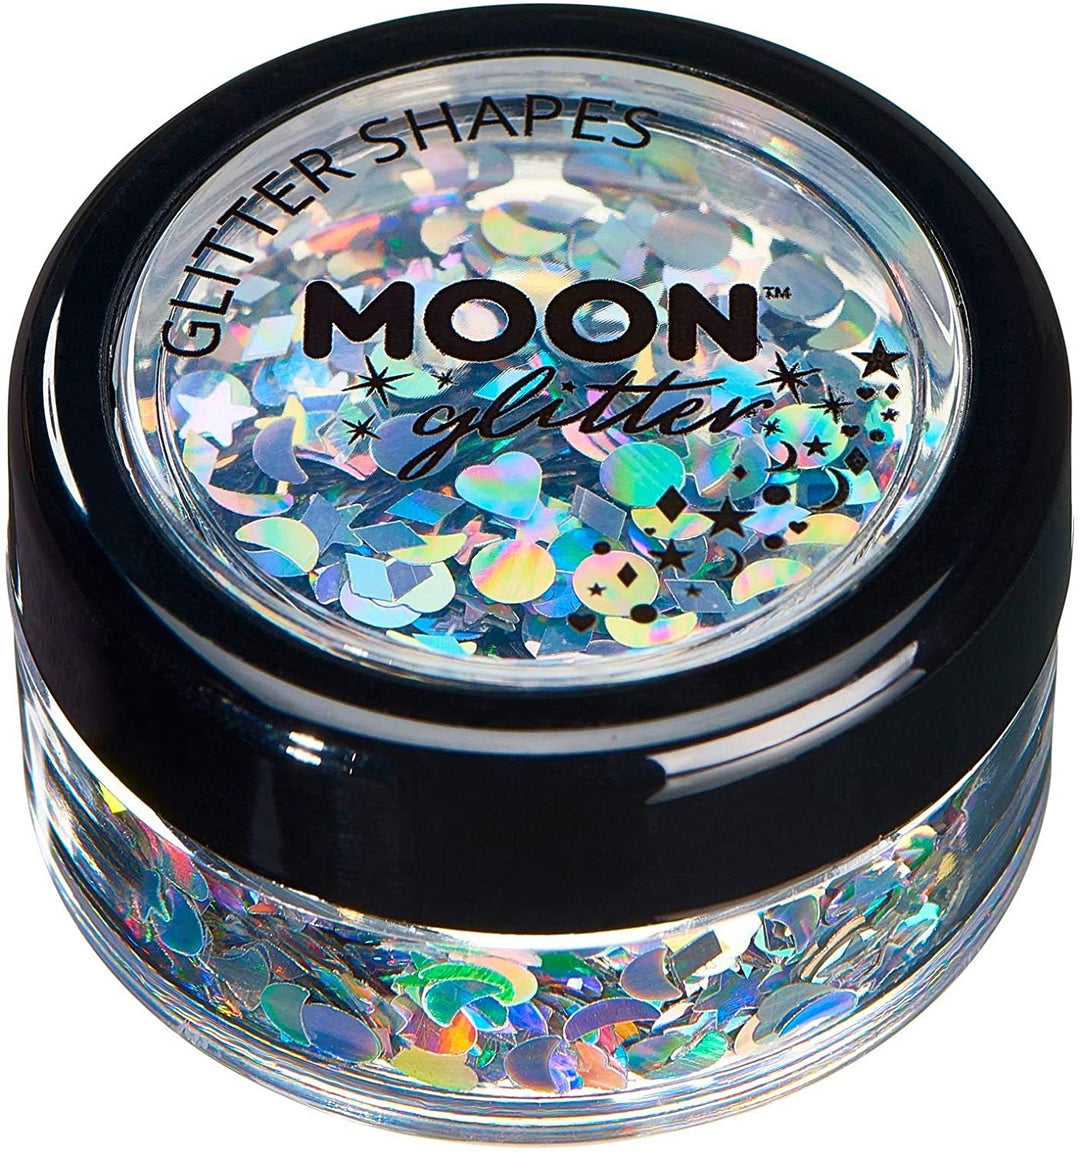 Smiffys Holographic Glitter Shapes di Moon Glitter - Argento - 3g